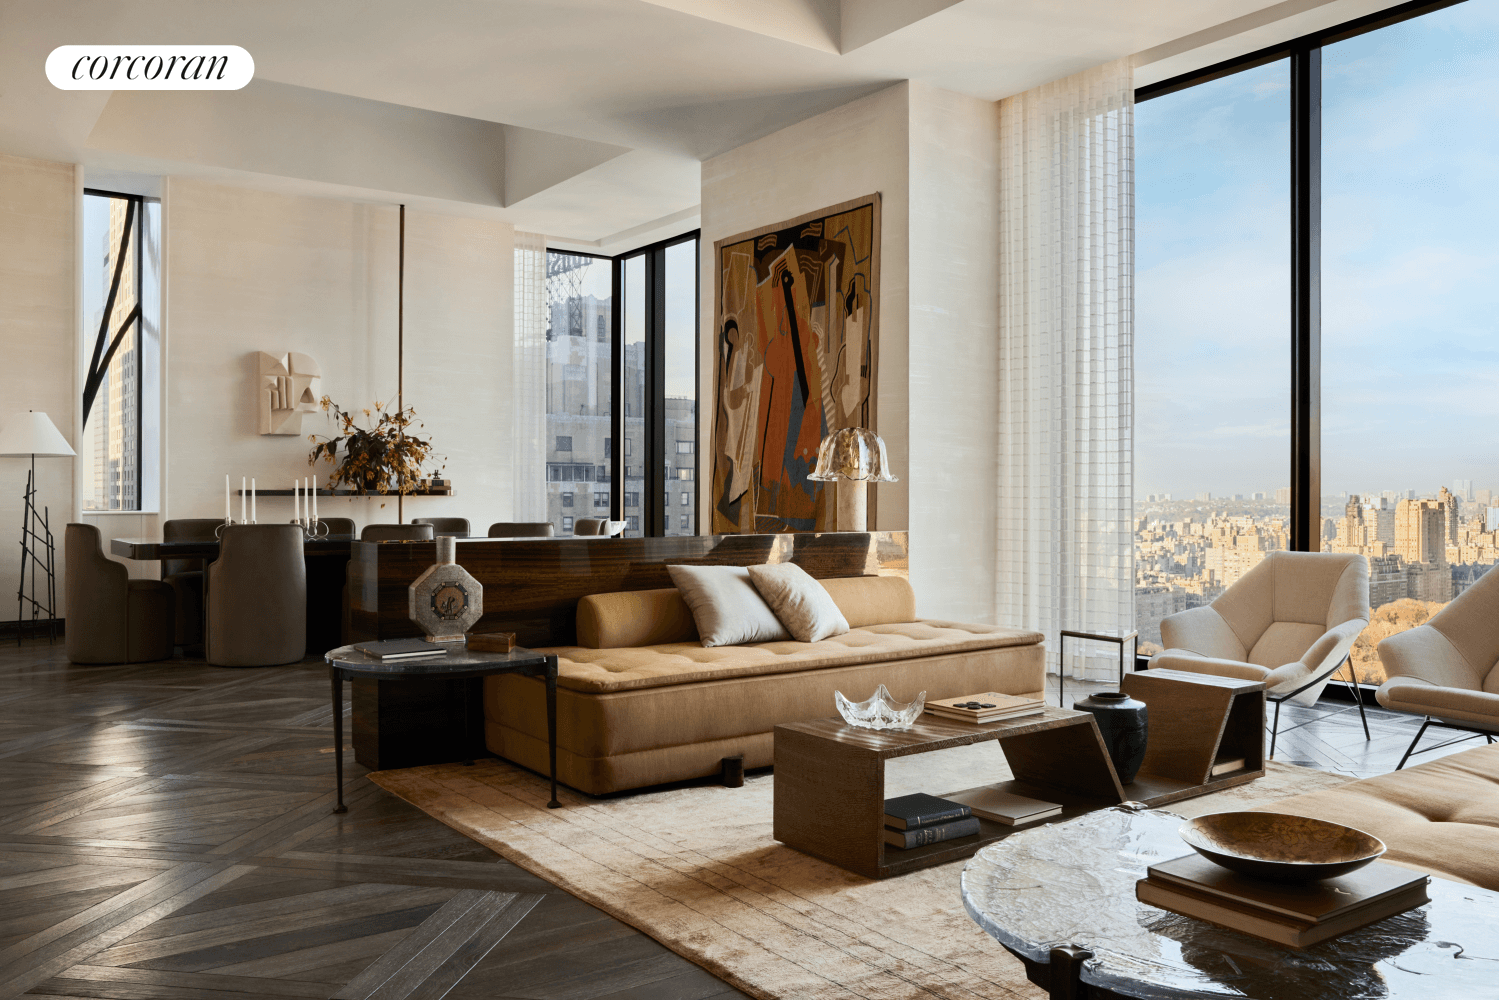 IMMEDIATE OCCUPANCY Enjoy beautiful views, light and high design in this prime full floor residence at 111 West 57th Street.